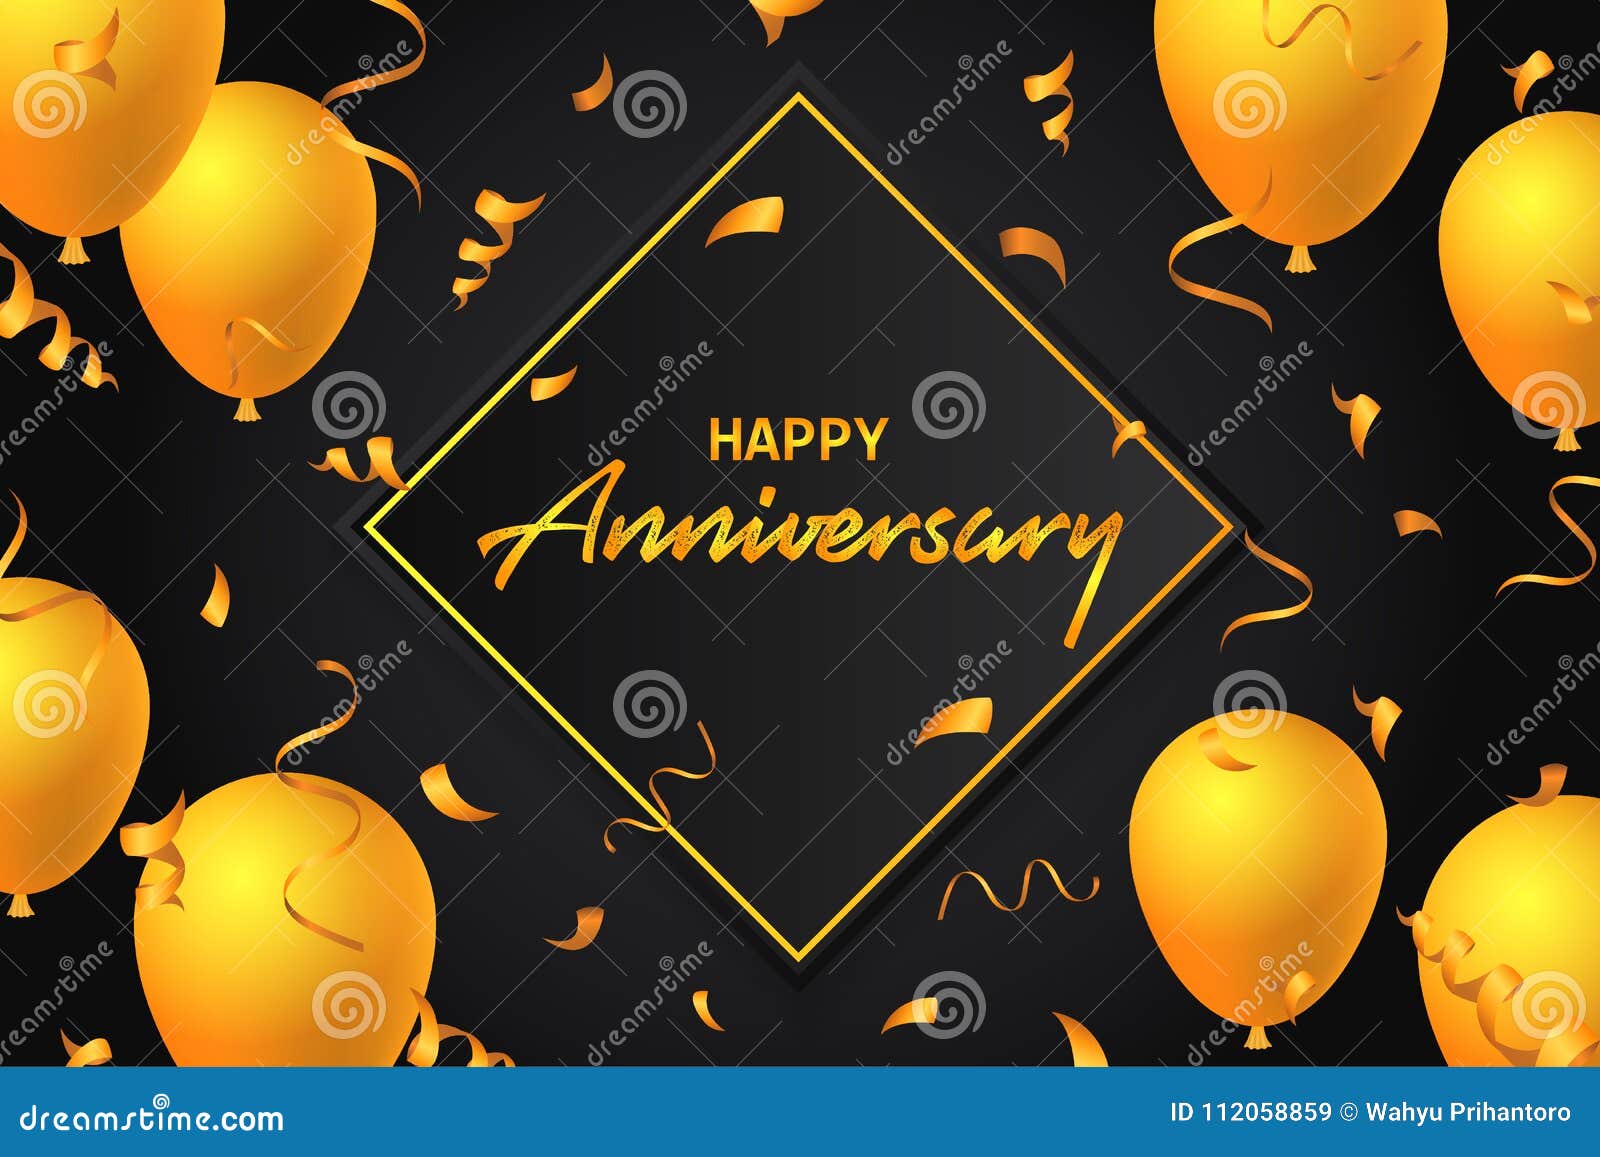 Happy Anniversary Balloons Typography Banner Background Illustration Poster  Design Template Birthday Celebration for Greeting Card Stock Vector -  Illustration of happiness, isolated: 112058859